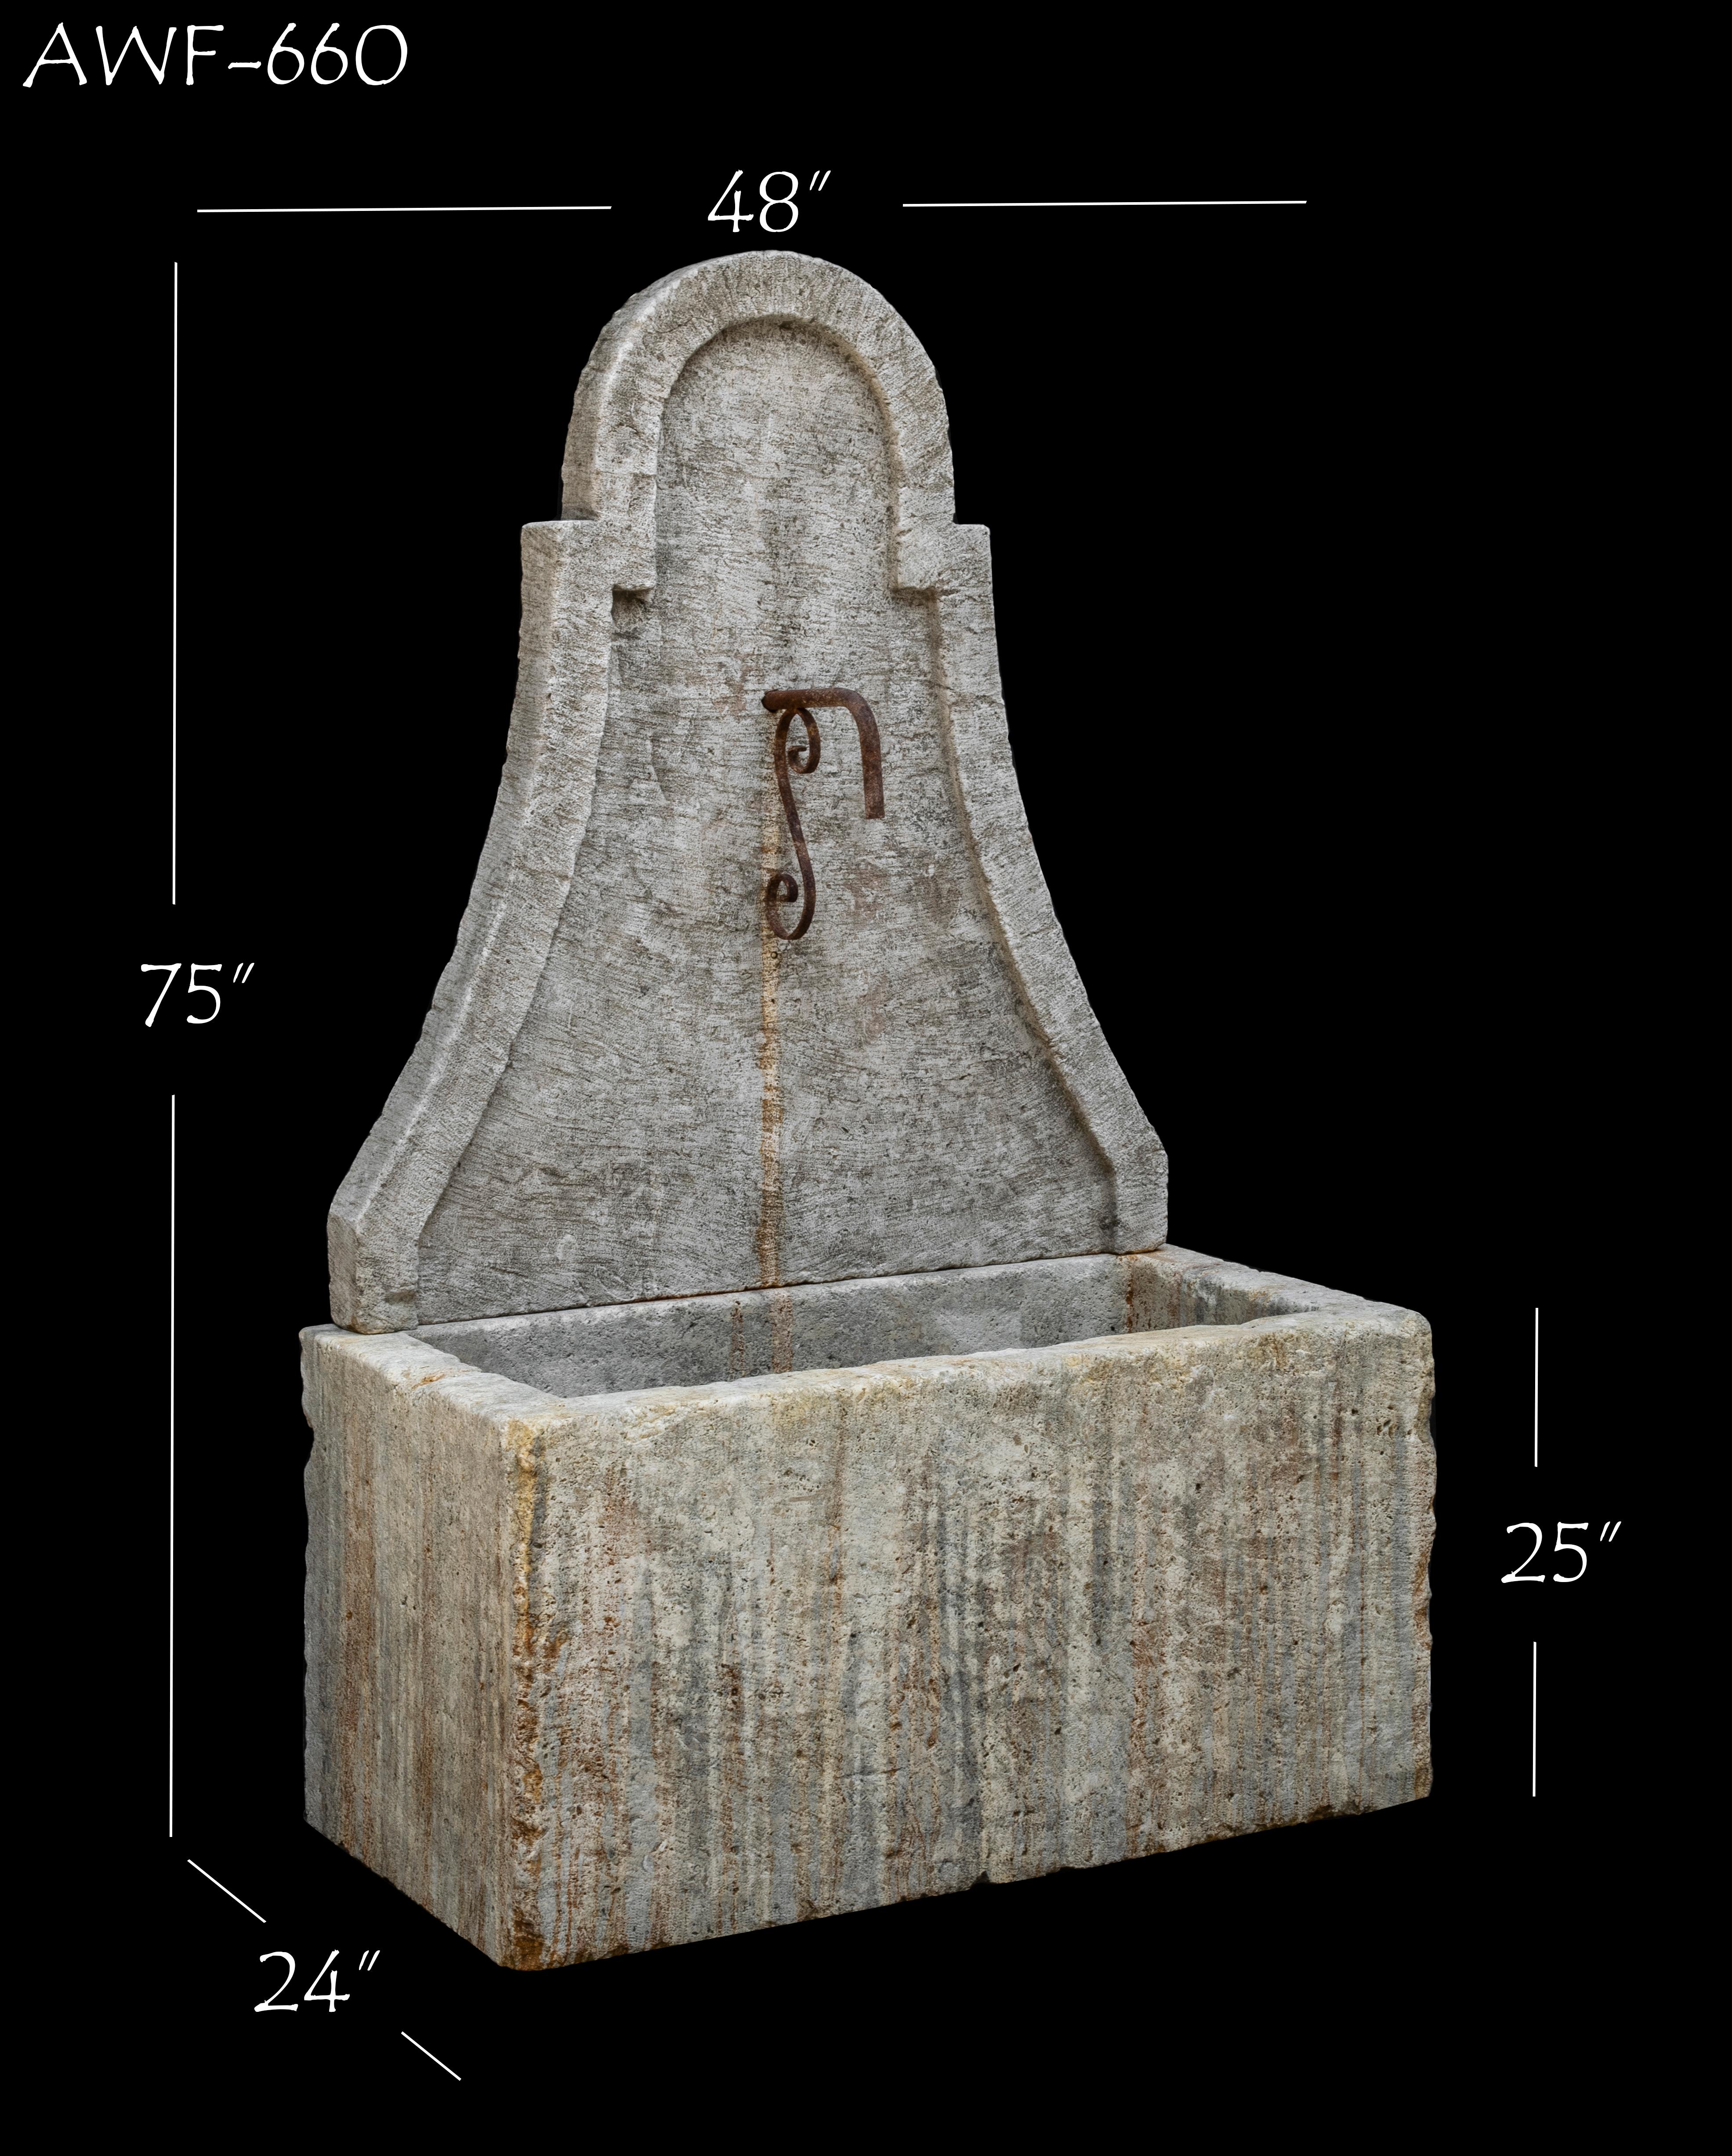 This beautiful antique 19th century limestone wall fountain is a great addition to any Mediterranean, Tuscan, rustic, or other custom style home. The naturally aged color and distressed patina for this old reclaimed hand-carved French fountain adds